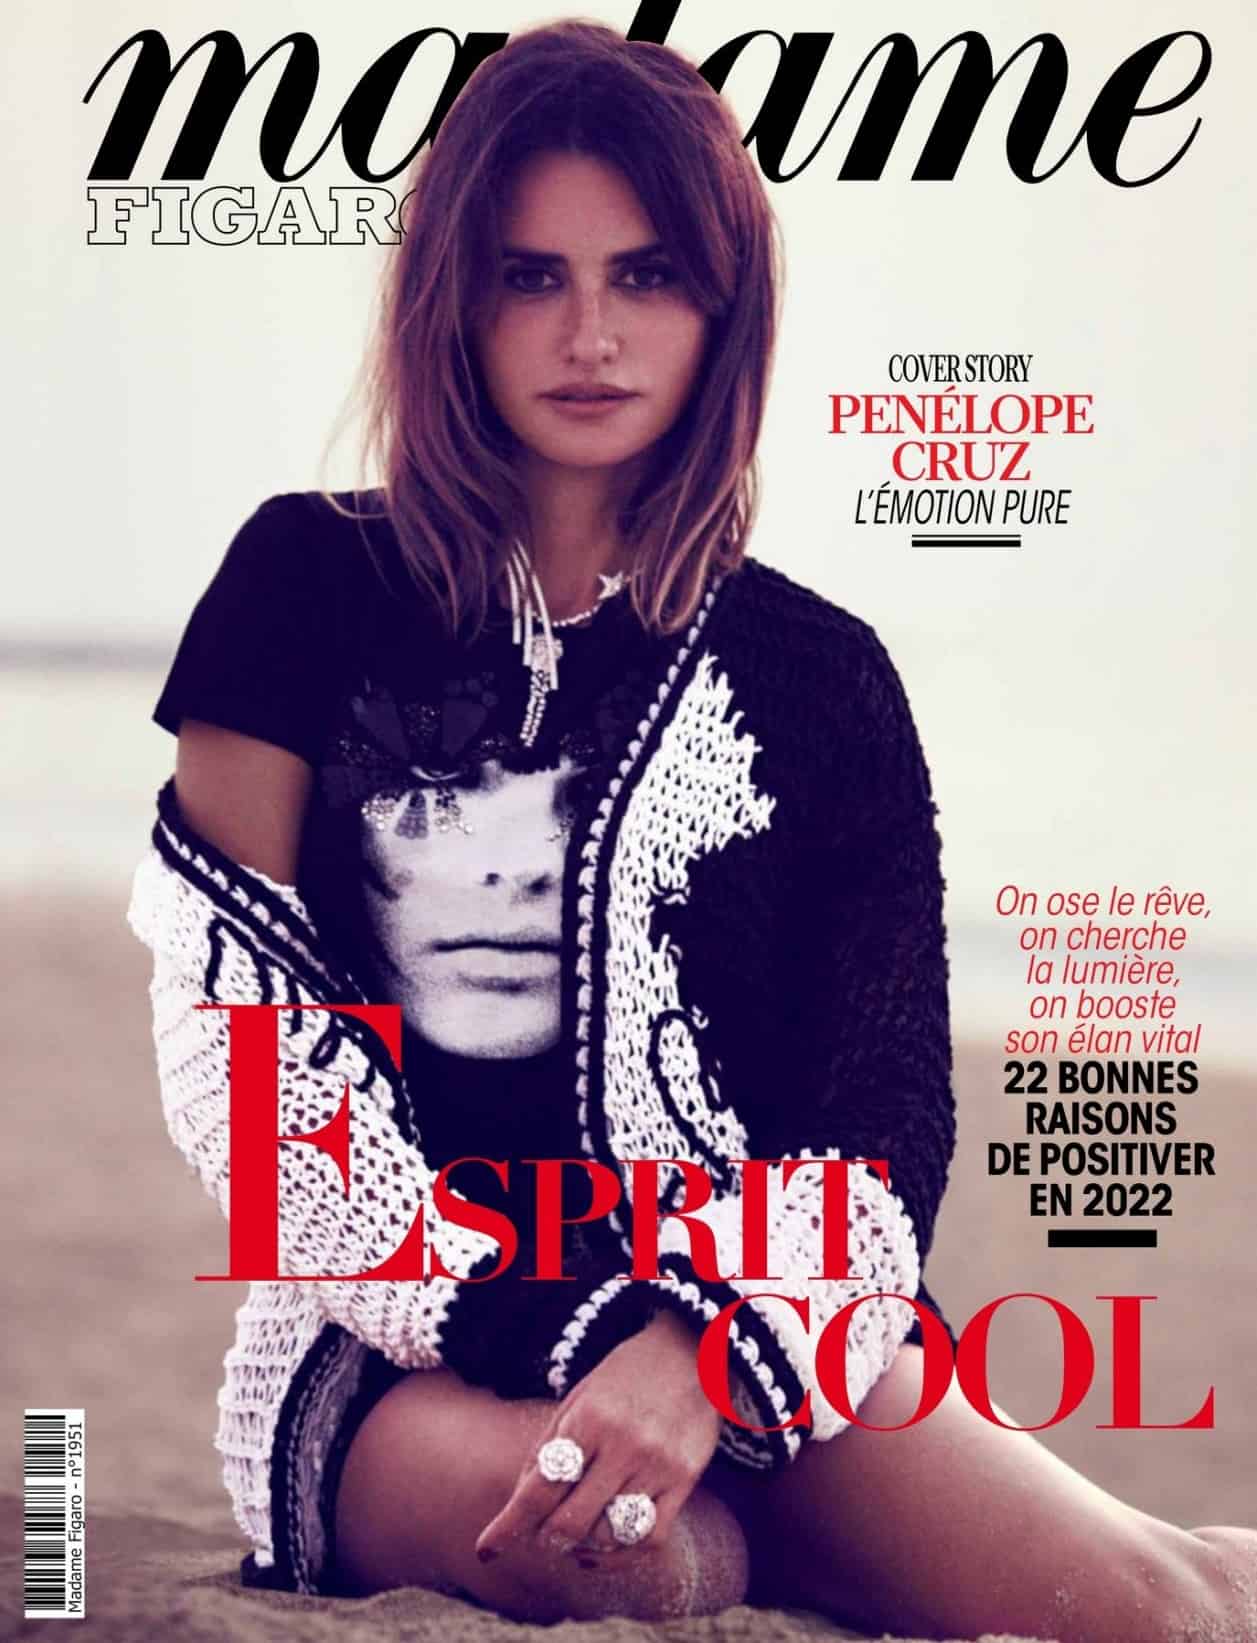 Penelope Cruz on the Cover of Madame Figaro – January 2022 Issue